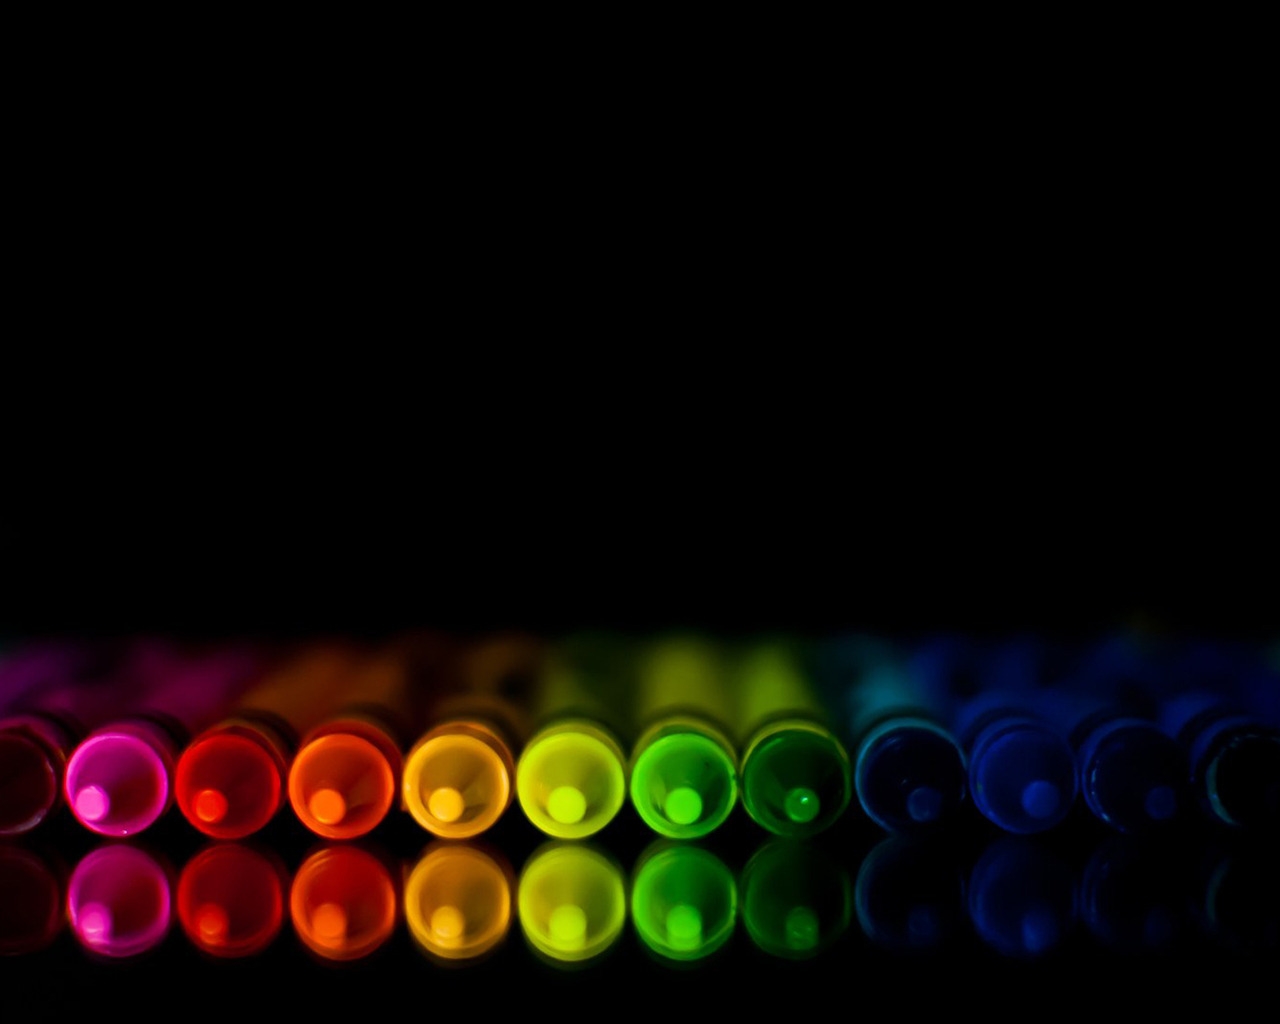 Crayons for 1280 x 1024 resolution